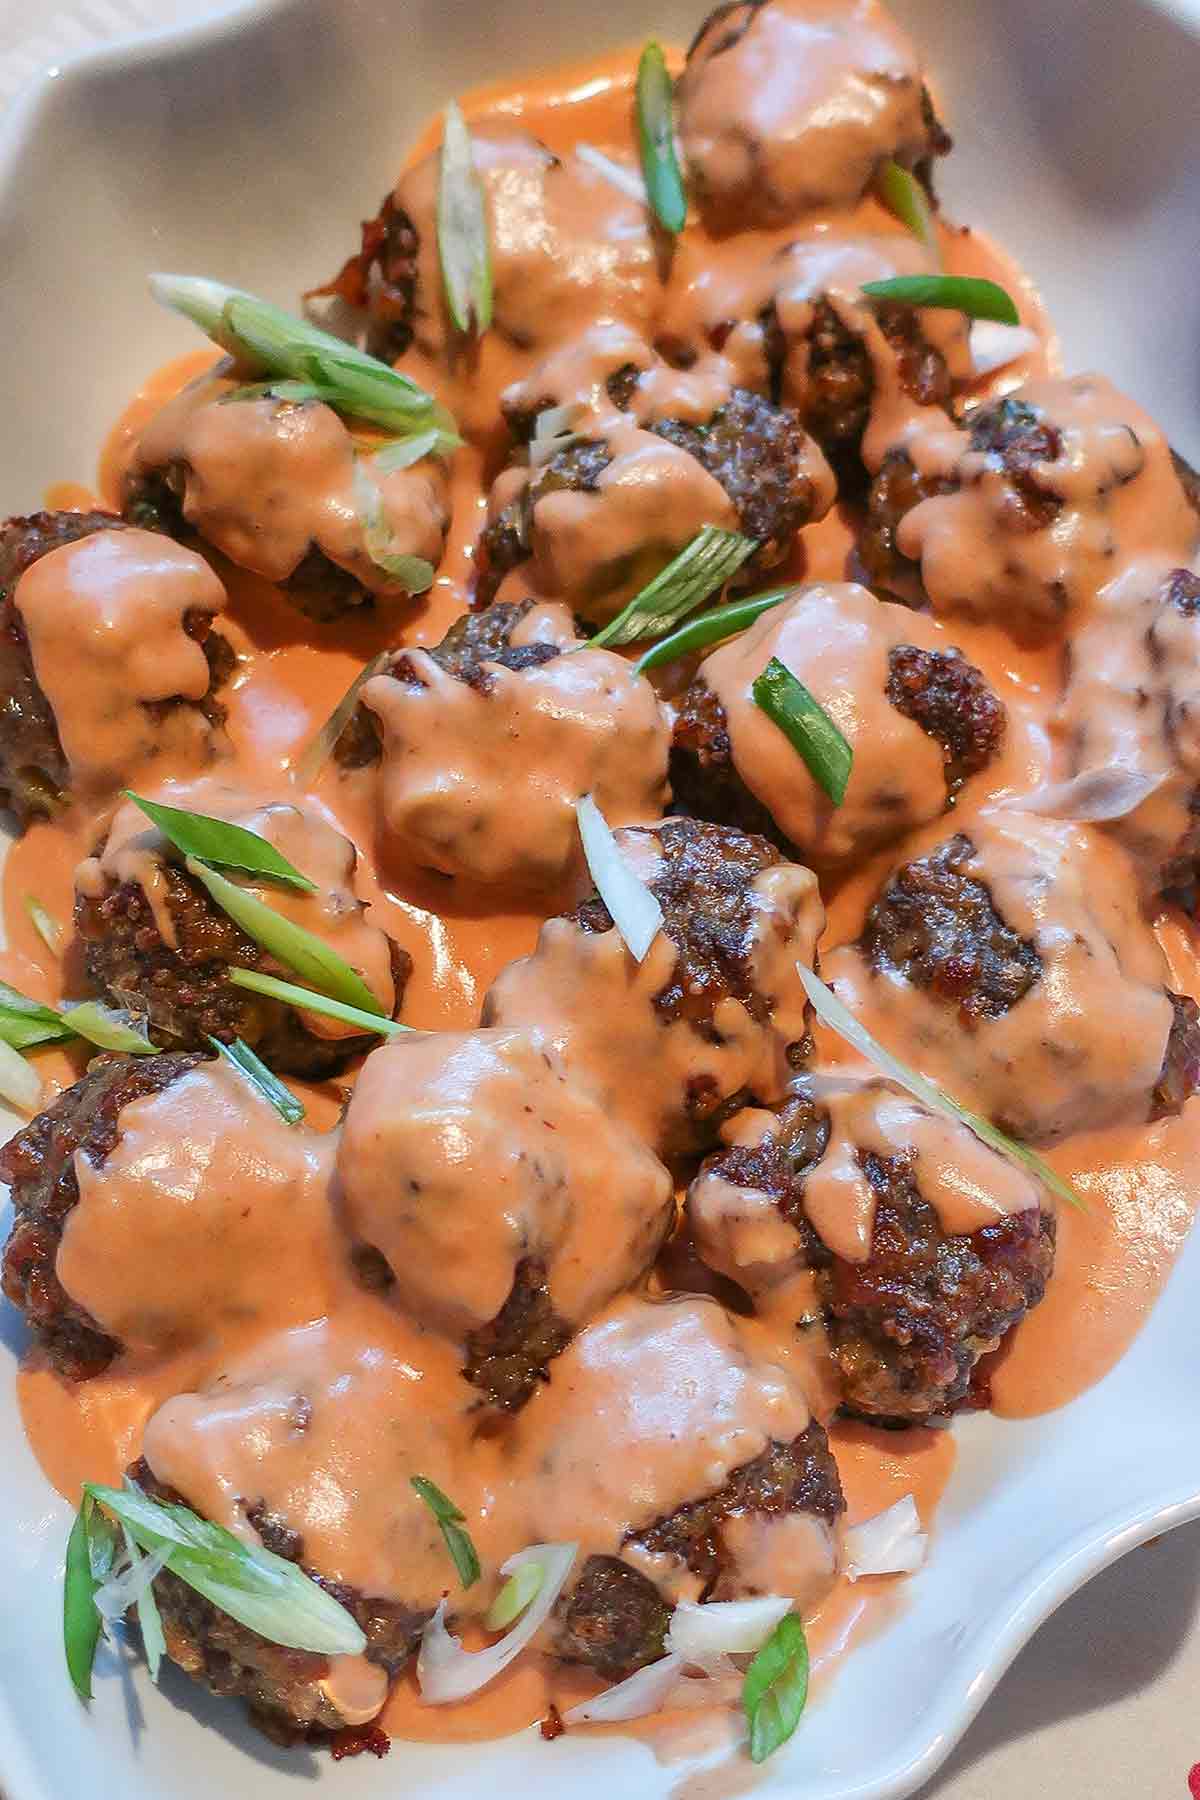 overview of gluten free Swedish meatballs with sauce and garnish